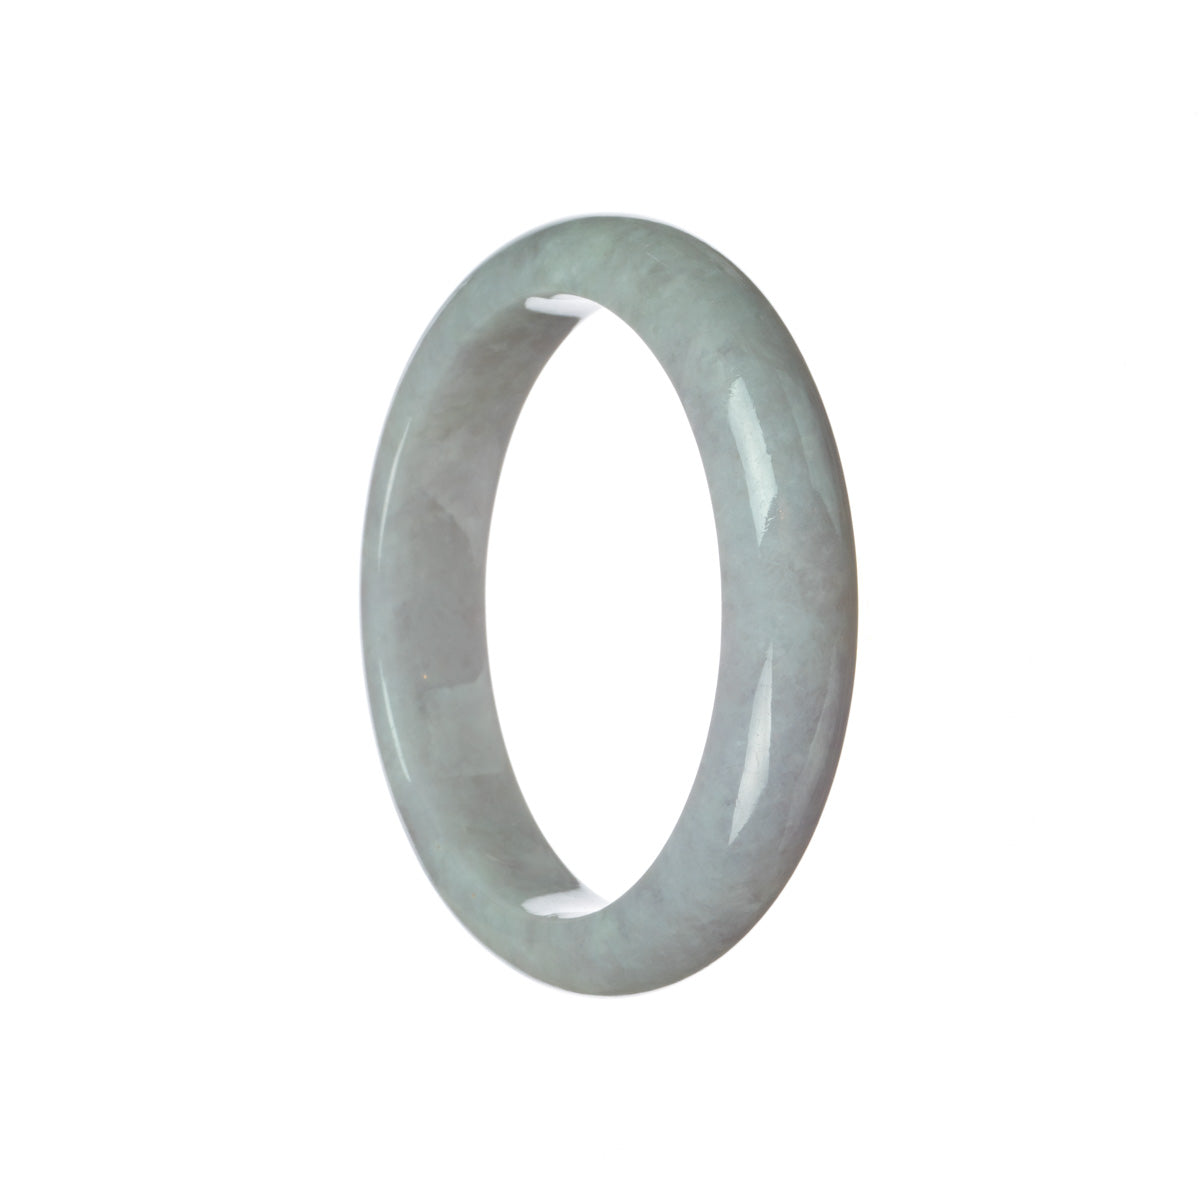 A close-up image of a lavender-colored traditional jade bangle with a semi-round shape, measuring 58mm in size. The bangle is made from genuine Grade A jade and is being sold by MAYS GEMS.